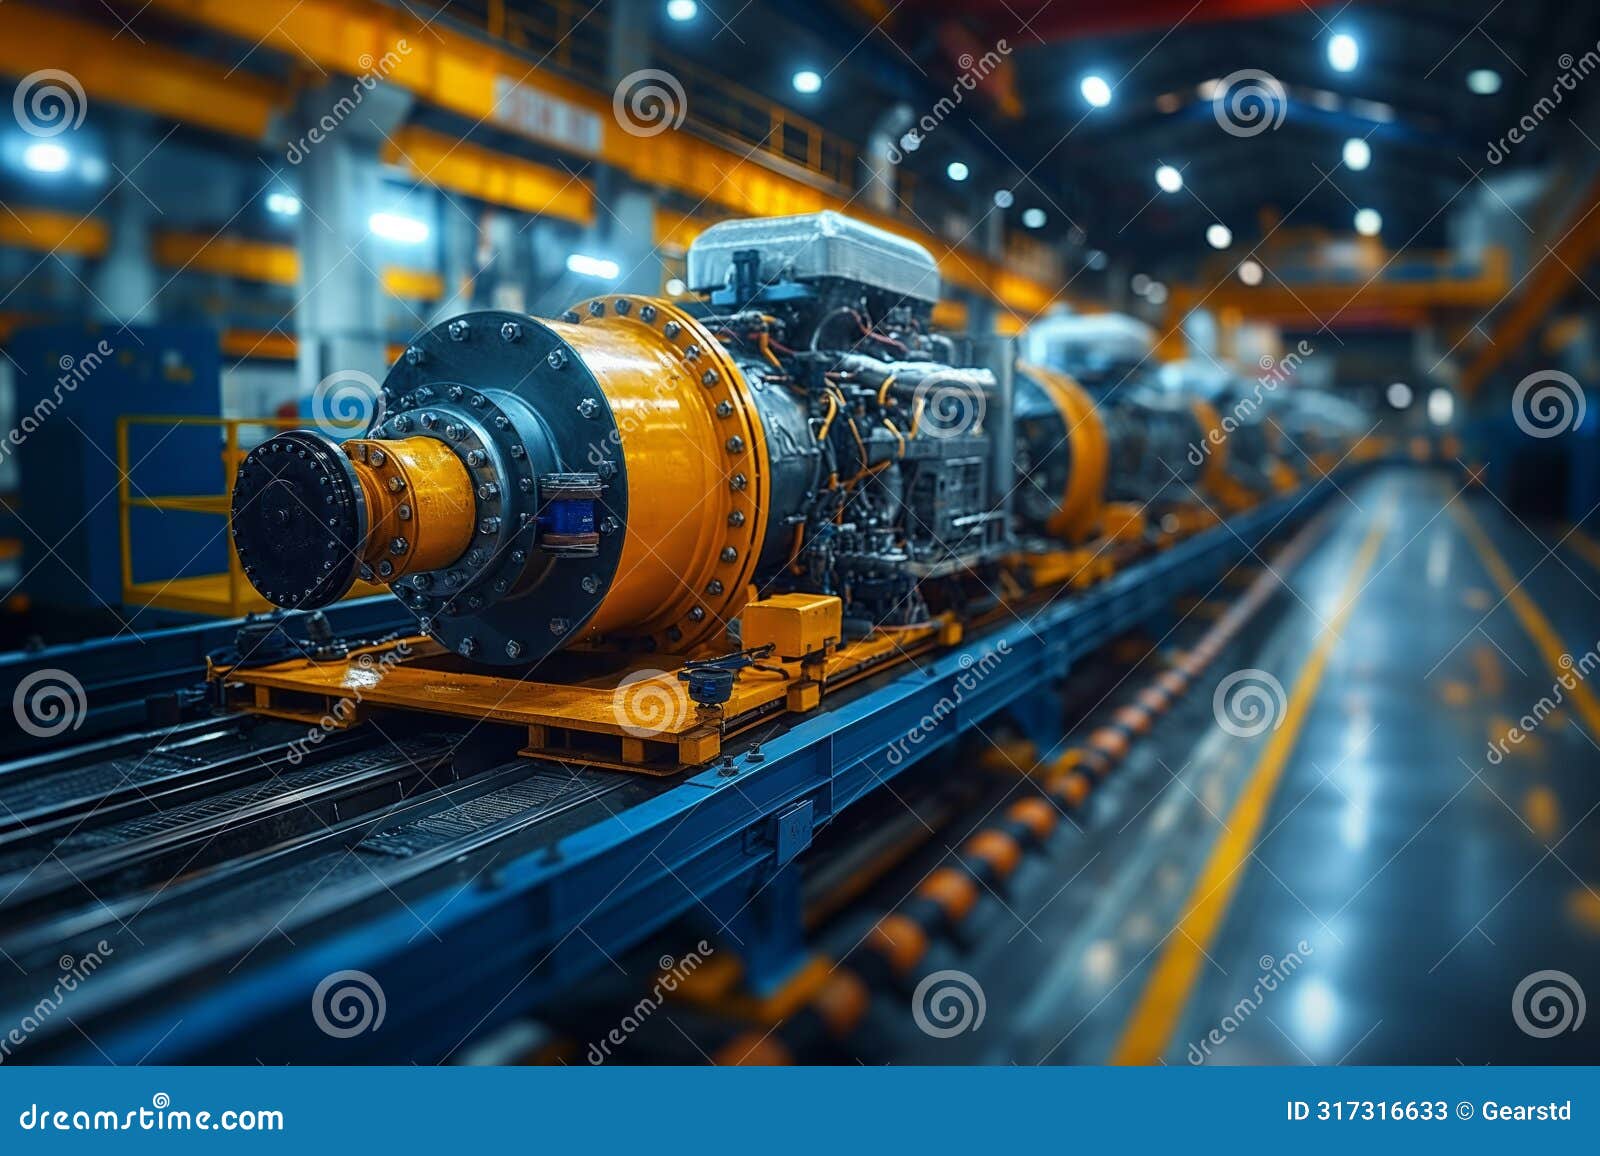 turbine engines in industrial setting